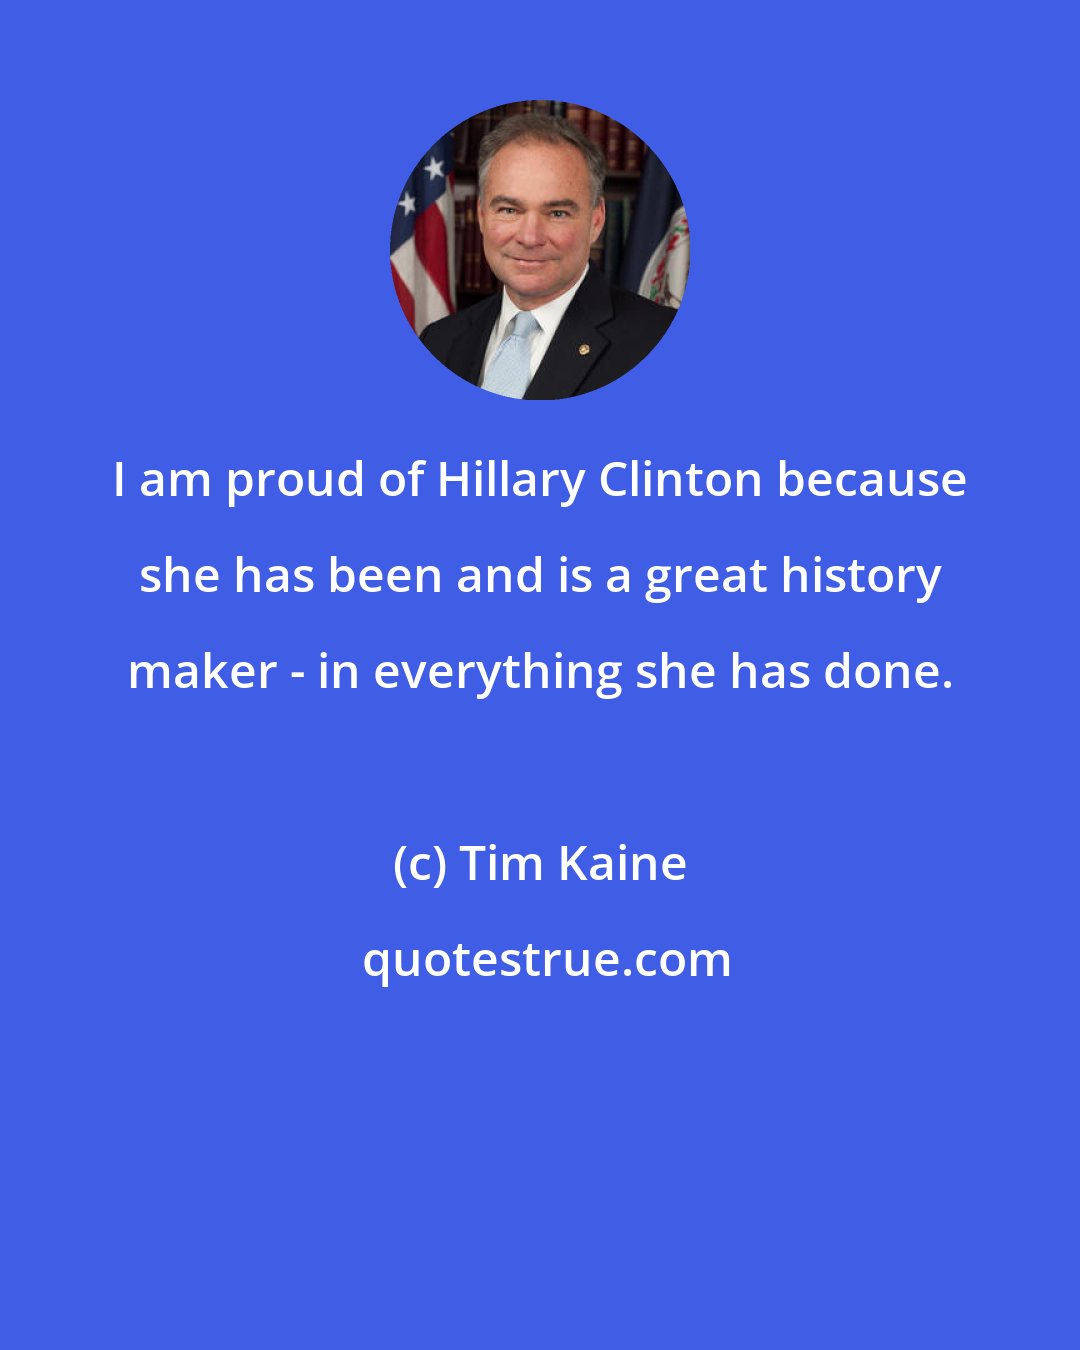 Tim Kaine: I am proud of Hillary Clinton because she has been and is a great history maker - in everything she has done.